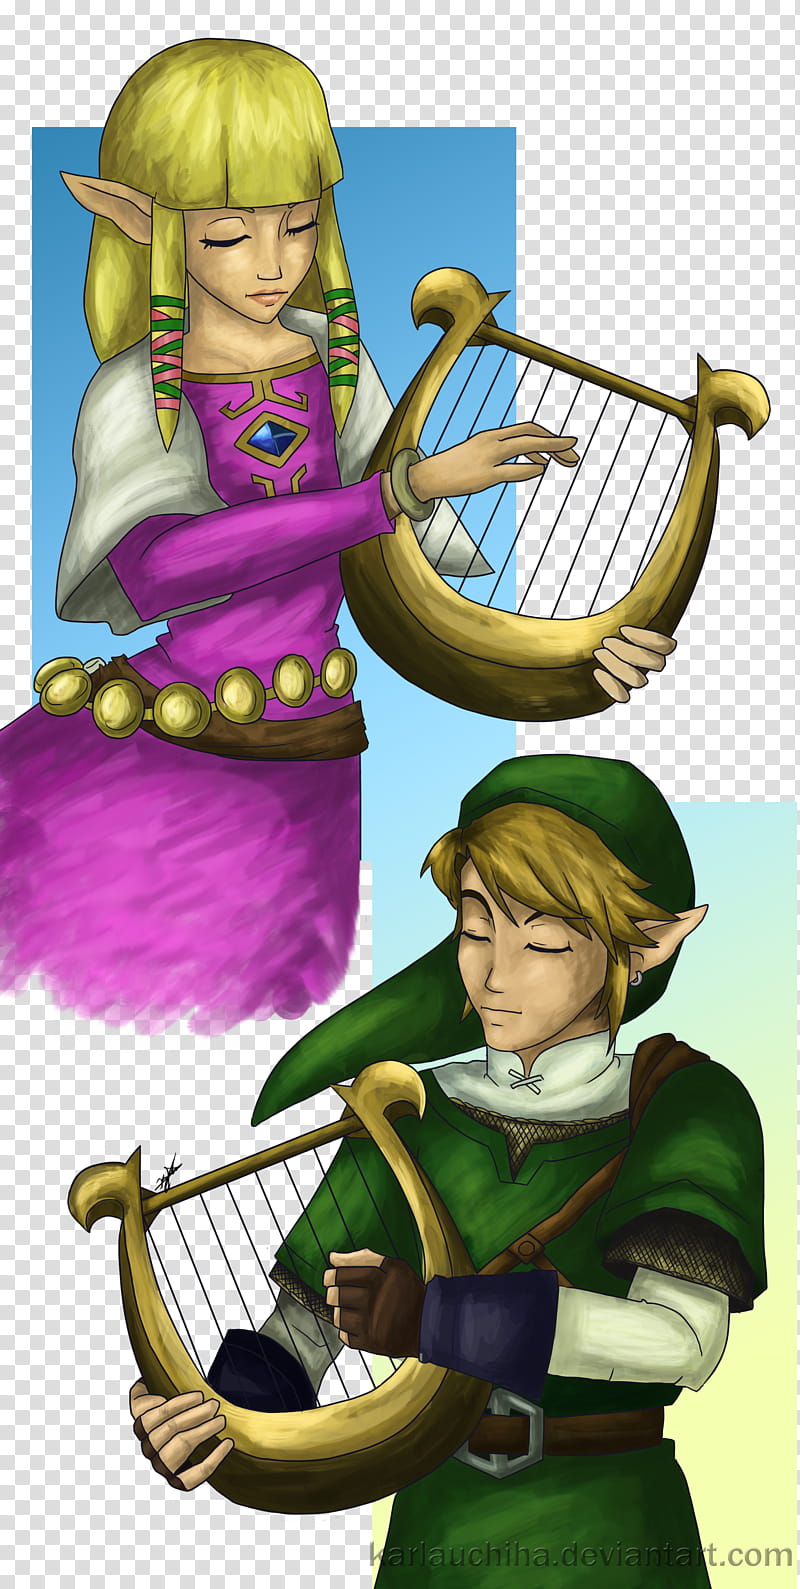 Zelda lullaby, two anime character playing harp illustration transparent background PNG clipart